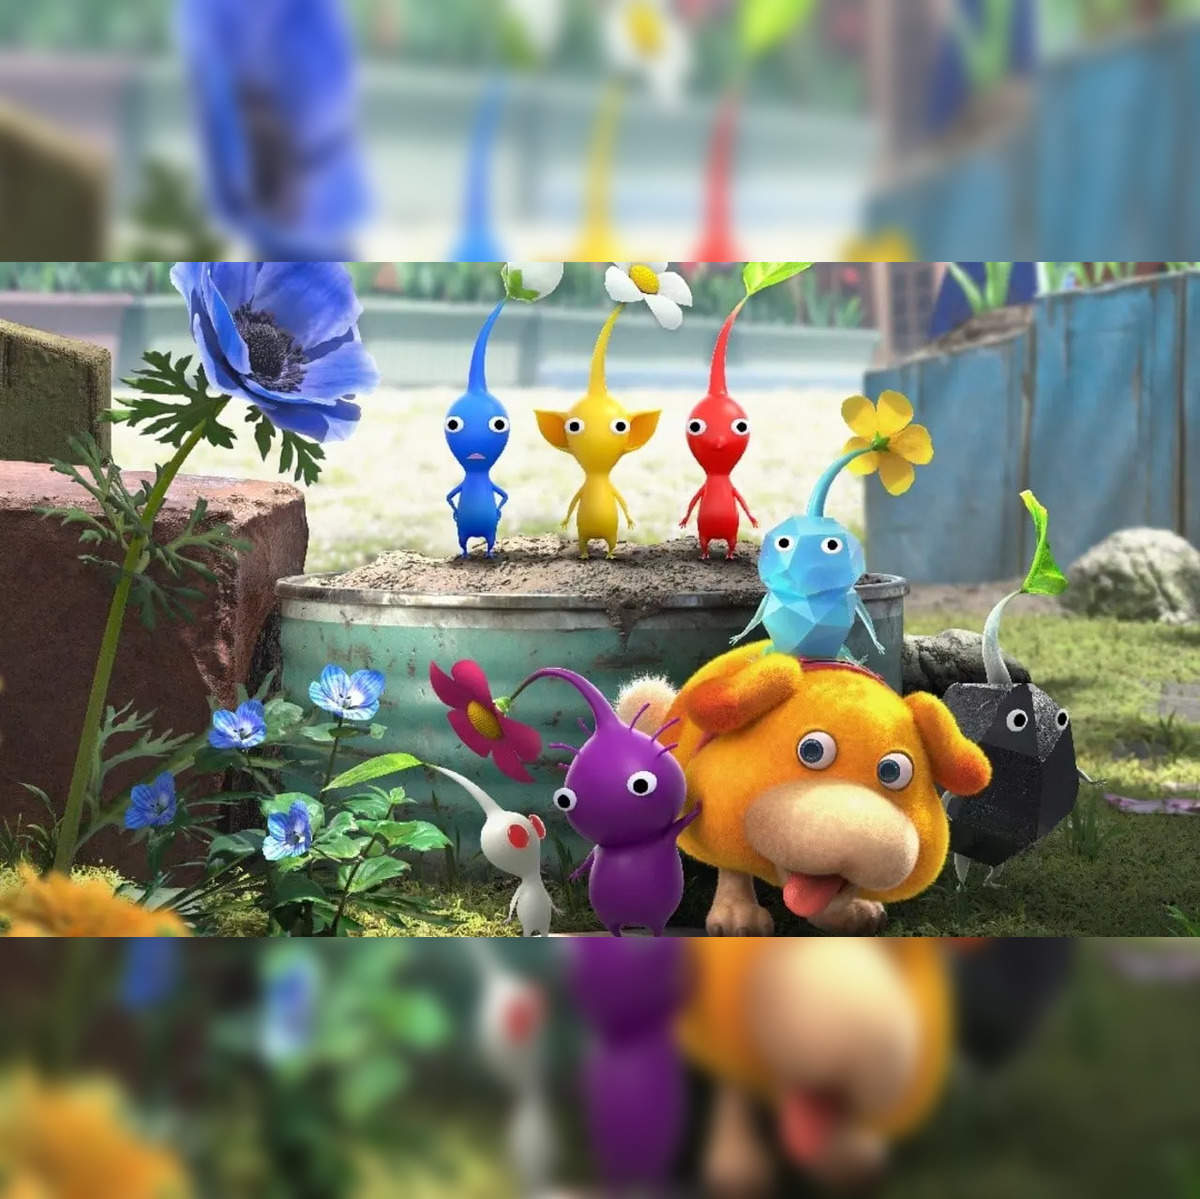 Pikmin 4 - Nintendo Switch for sale online